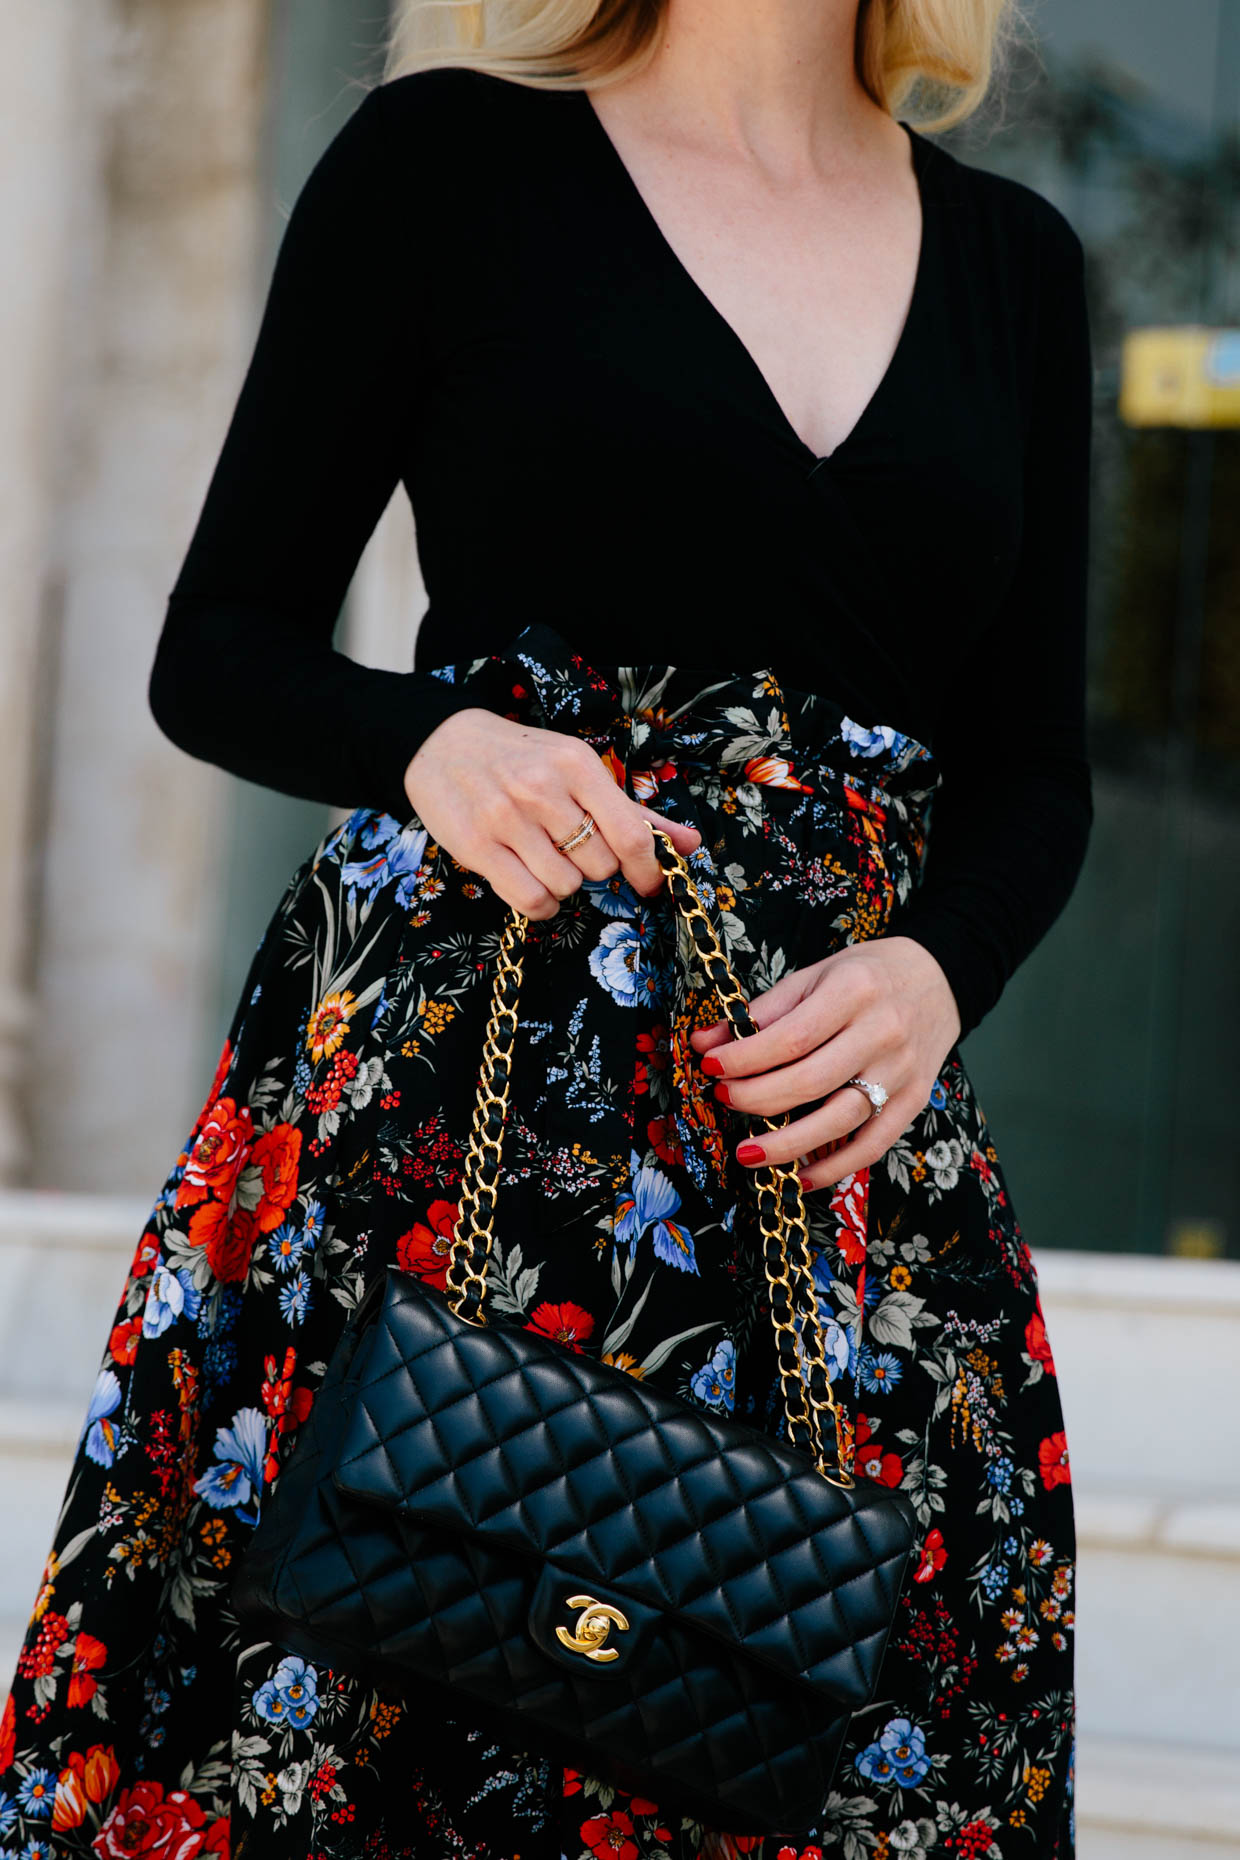 Black bodysuit with floral print skirt and Chanel bag chic spring